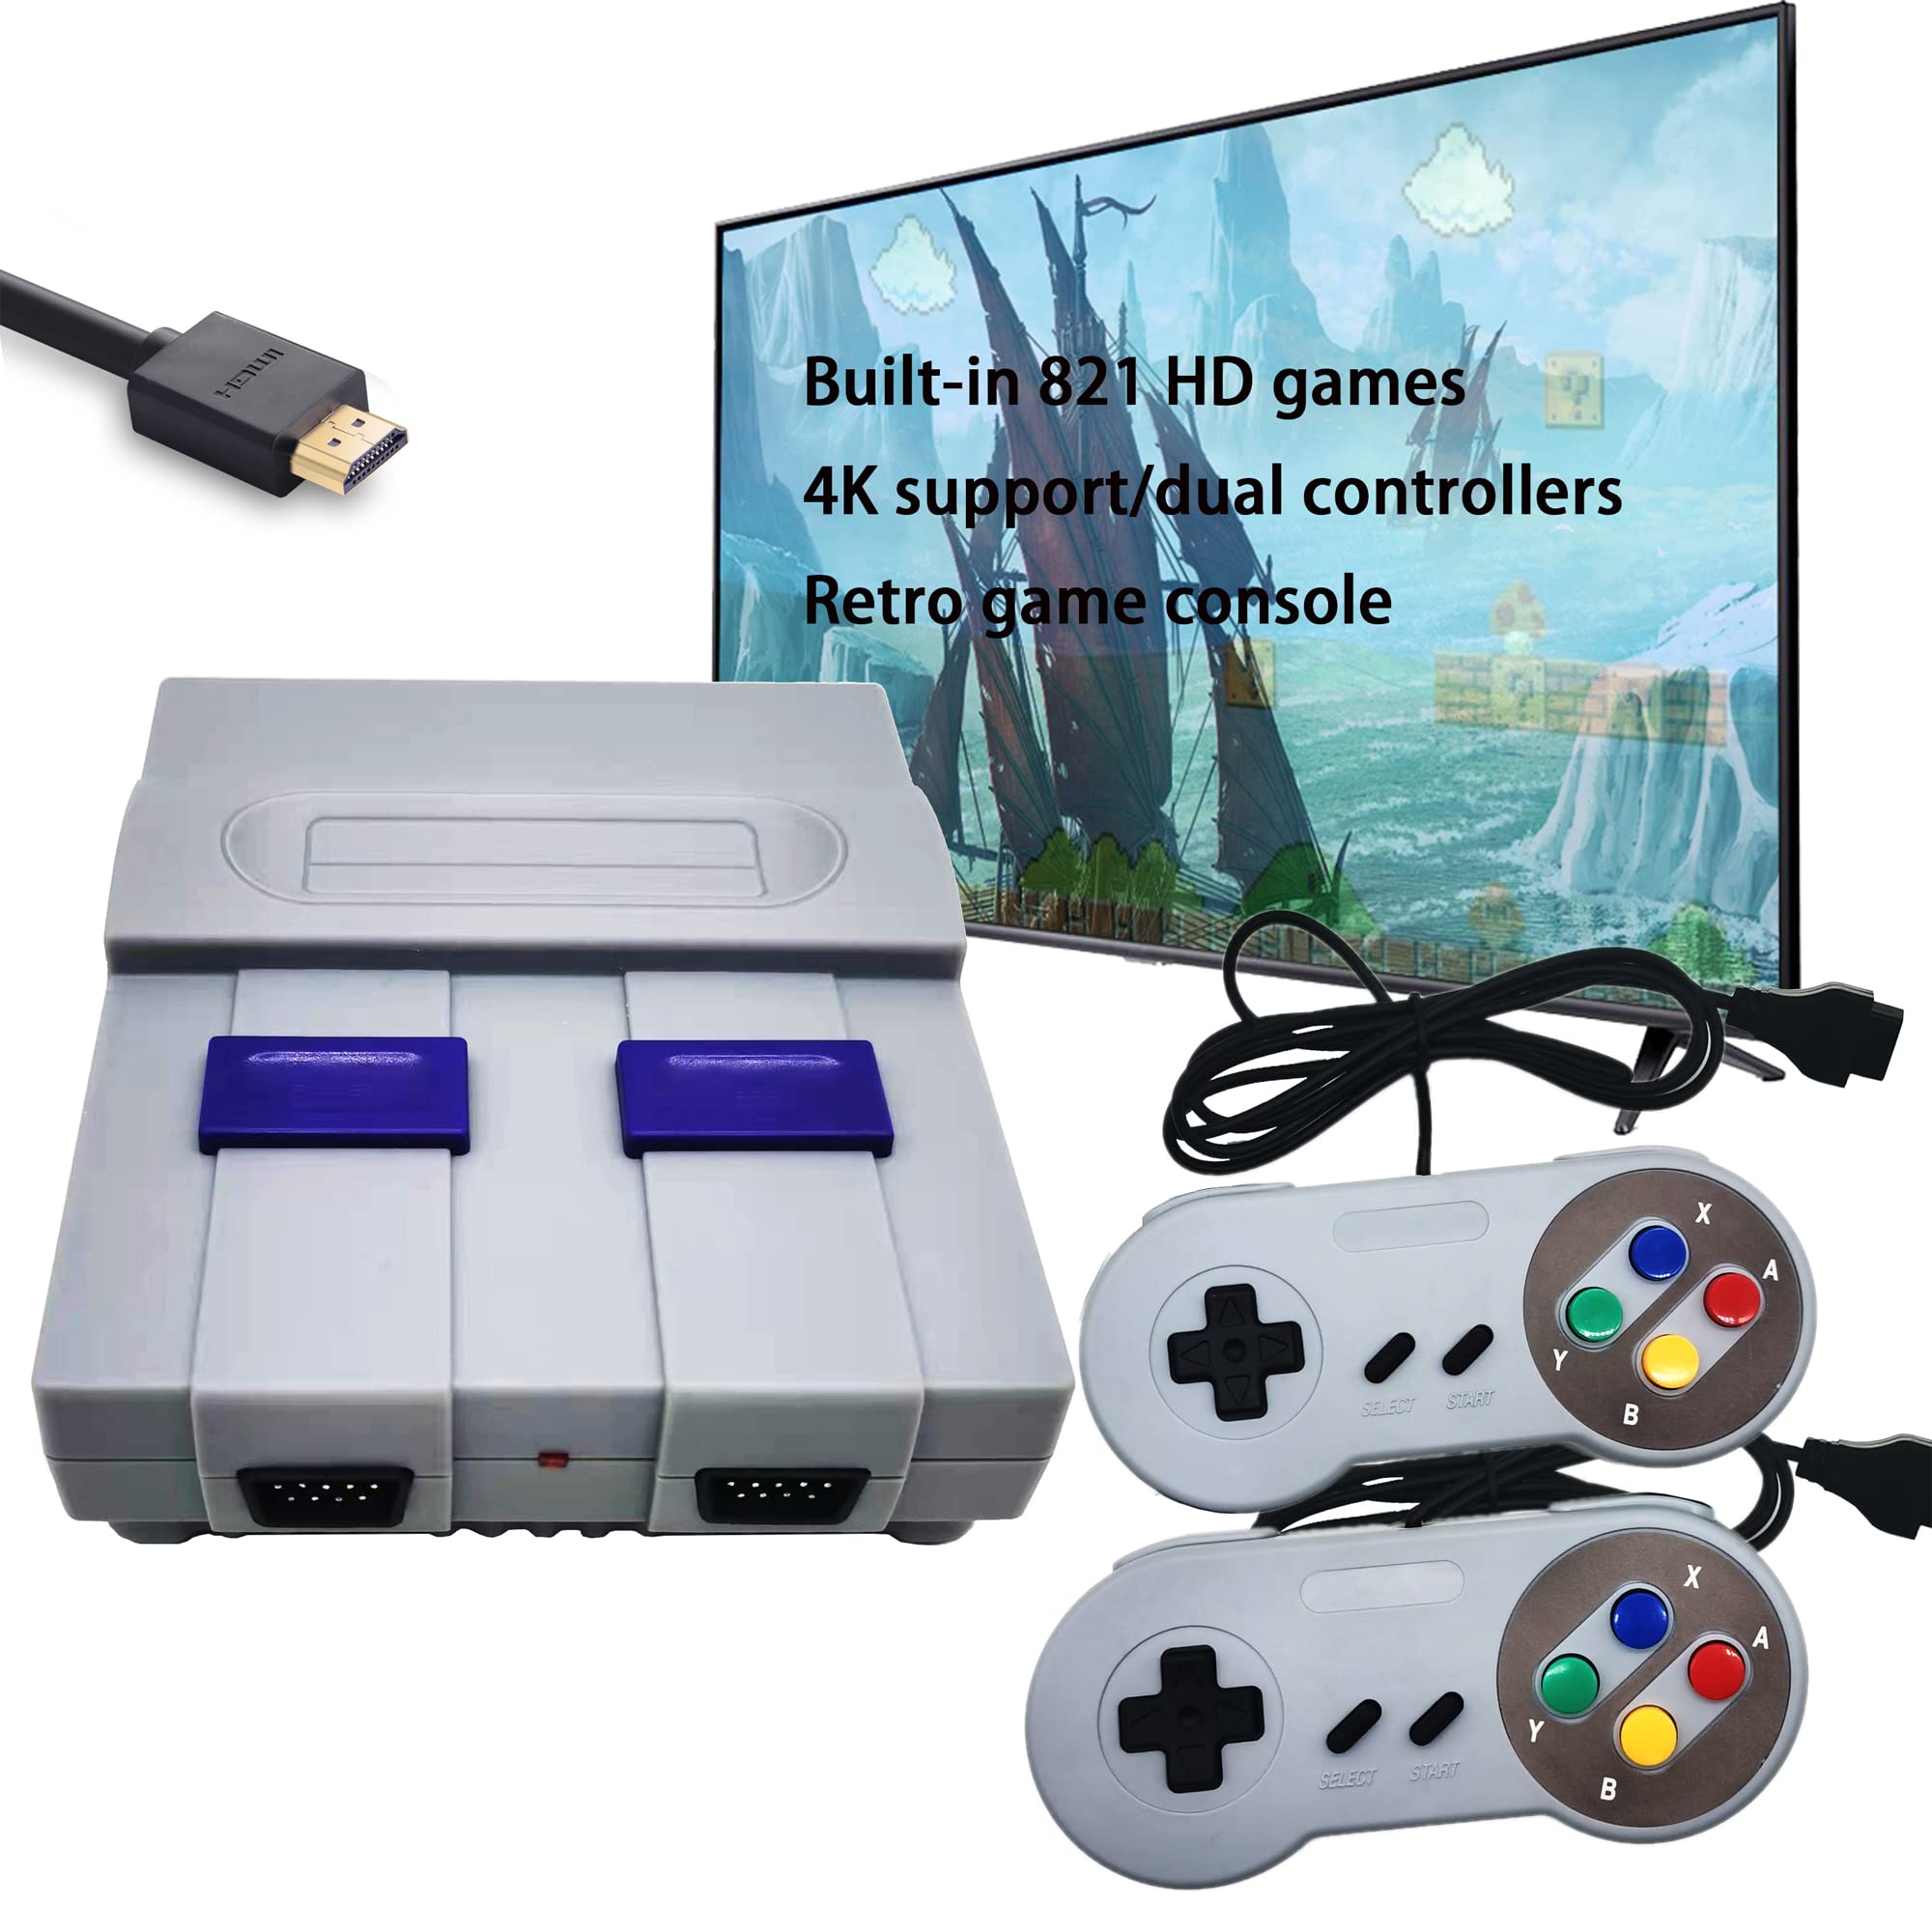 Retro Game Console Super Classic Mini Video Game Console with Built-in 821 HD Gaming TV Plug and Play Video Game System.